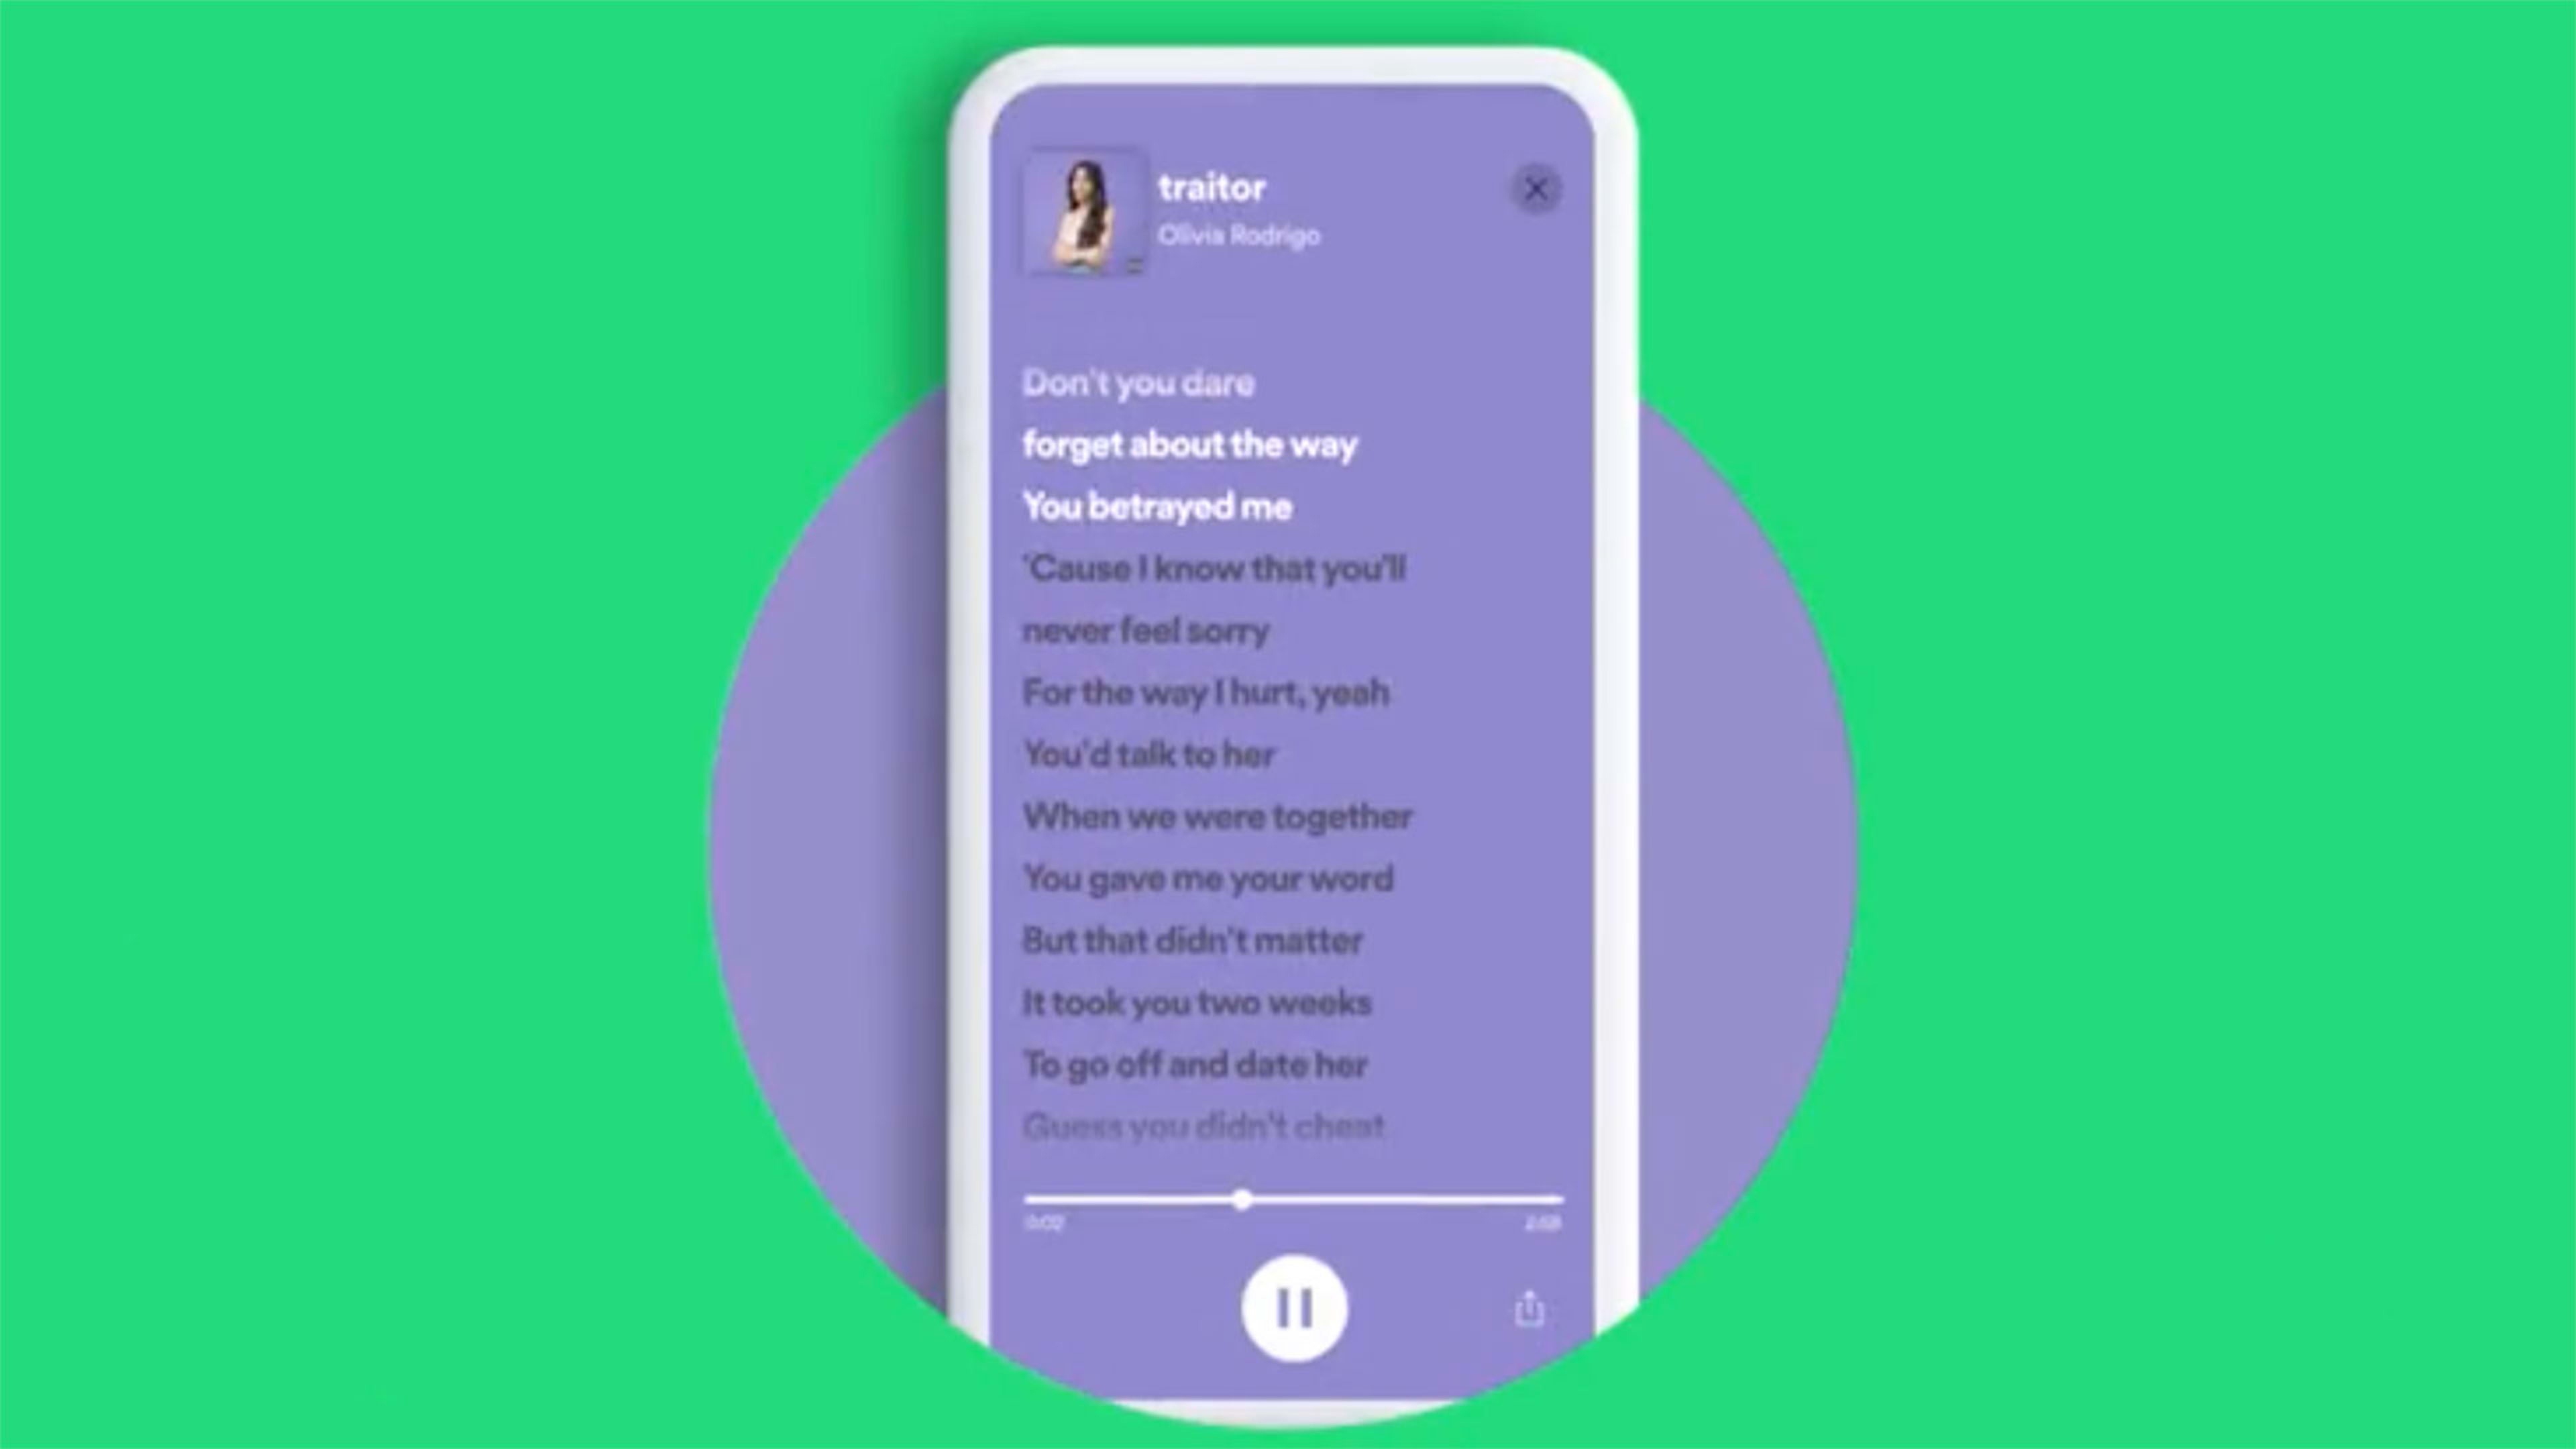 Spotify finally introduces visual song lyrics. Here’s how to use the new feature